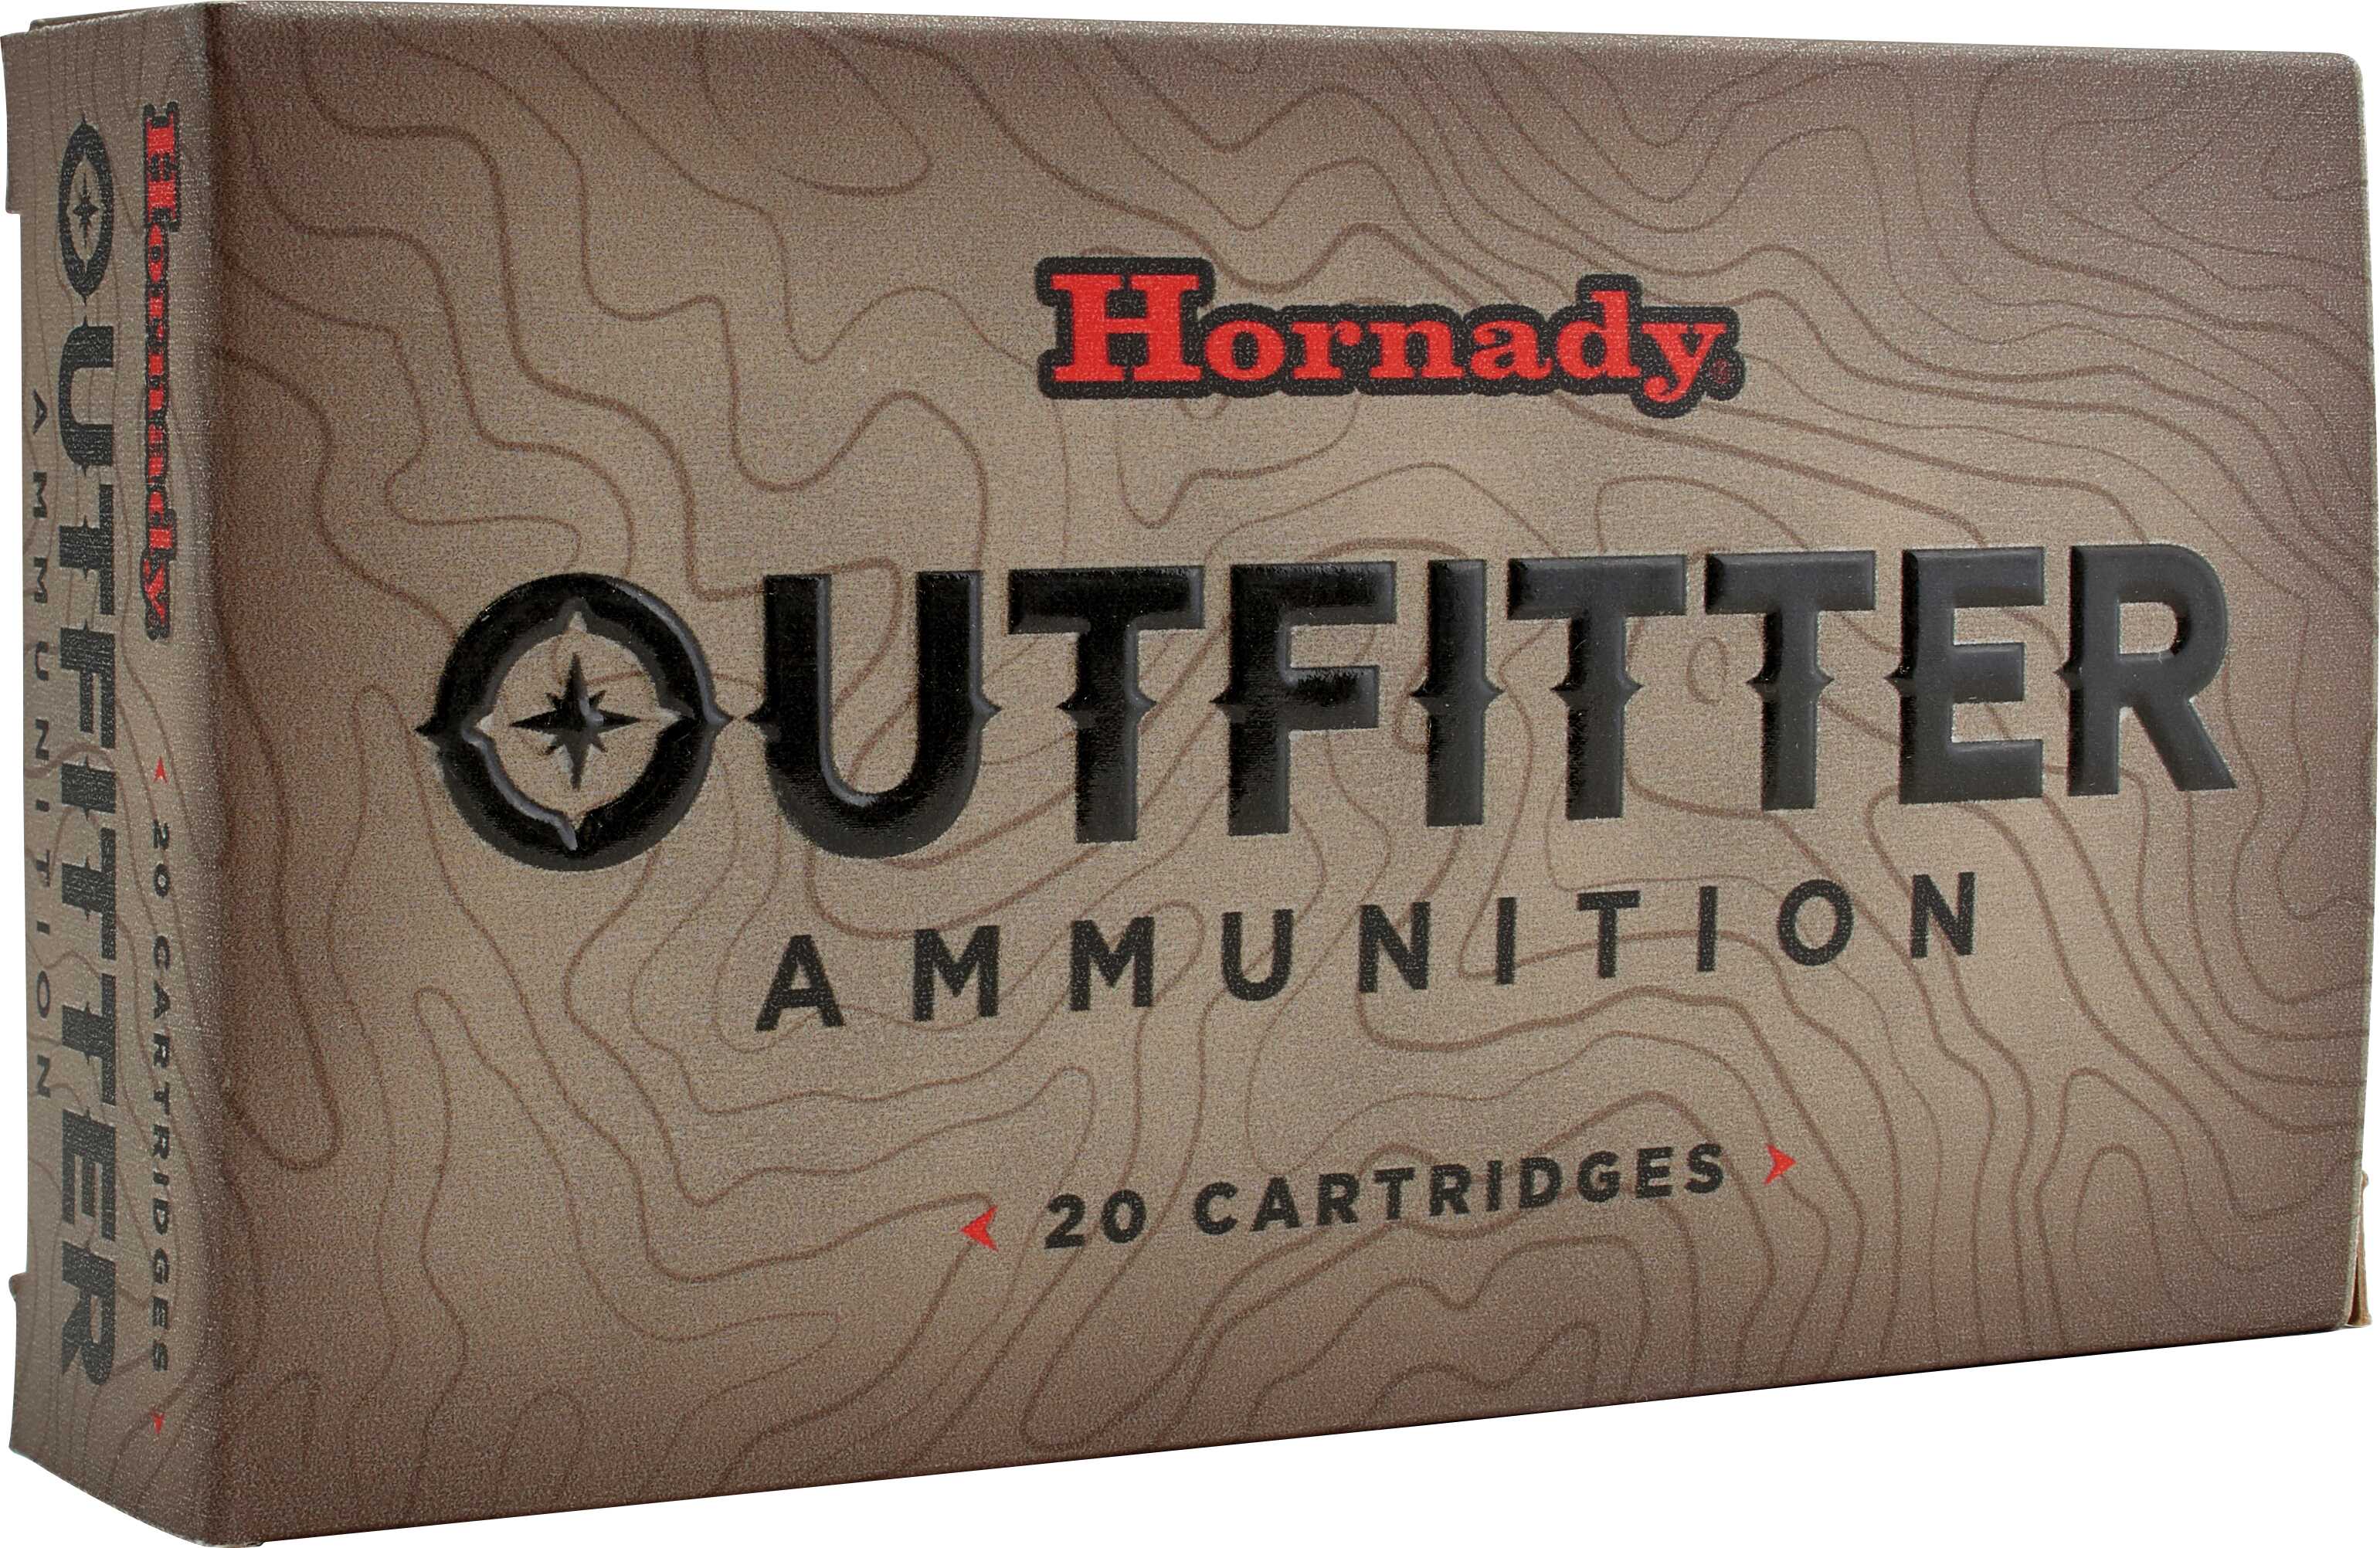 Hornady Outfitter 270 Win 130 gr Copper Alloy eXpanding (CX) Ammo 20 Round Box